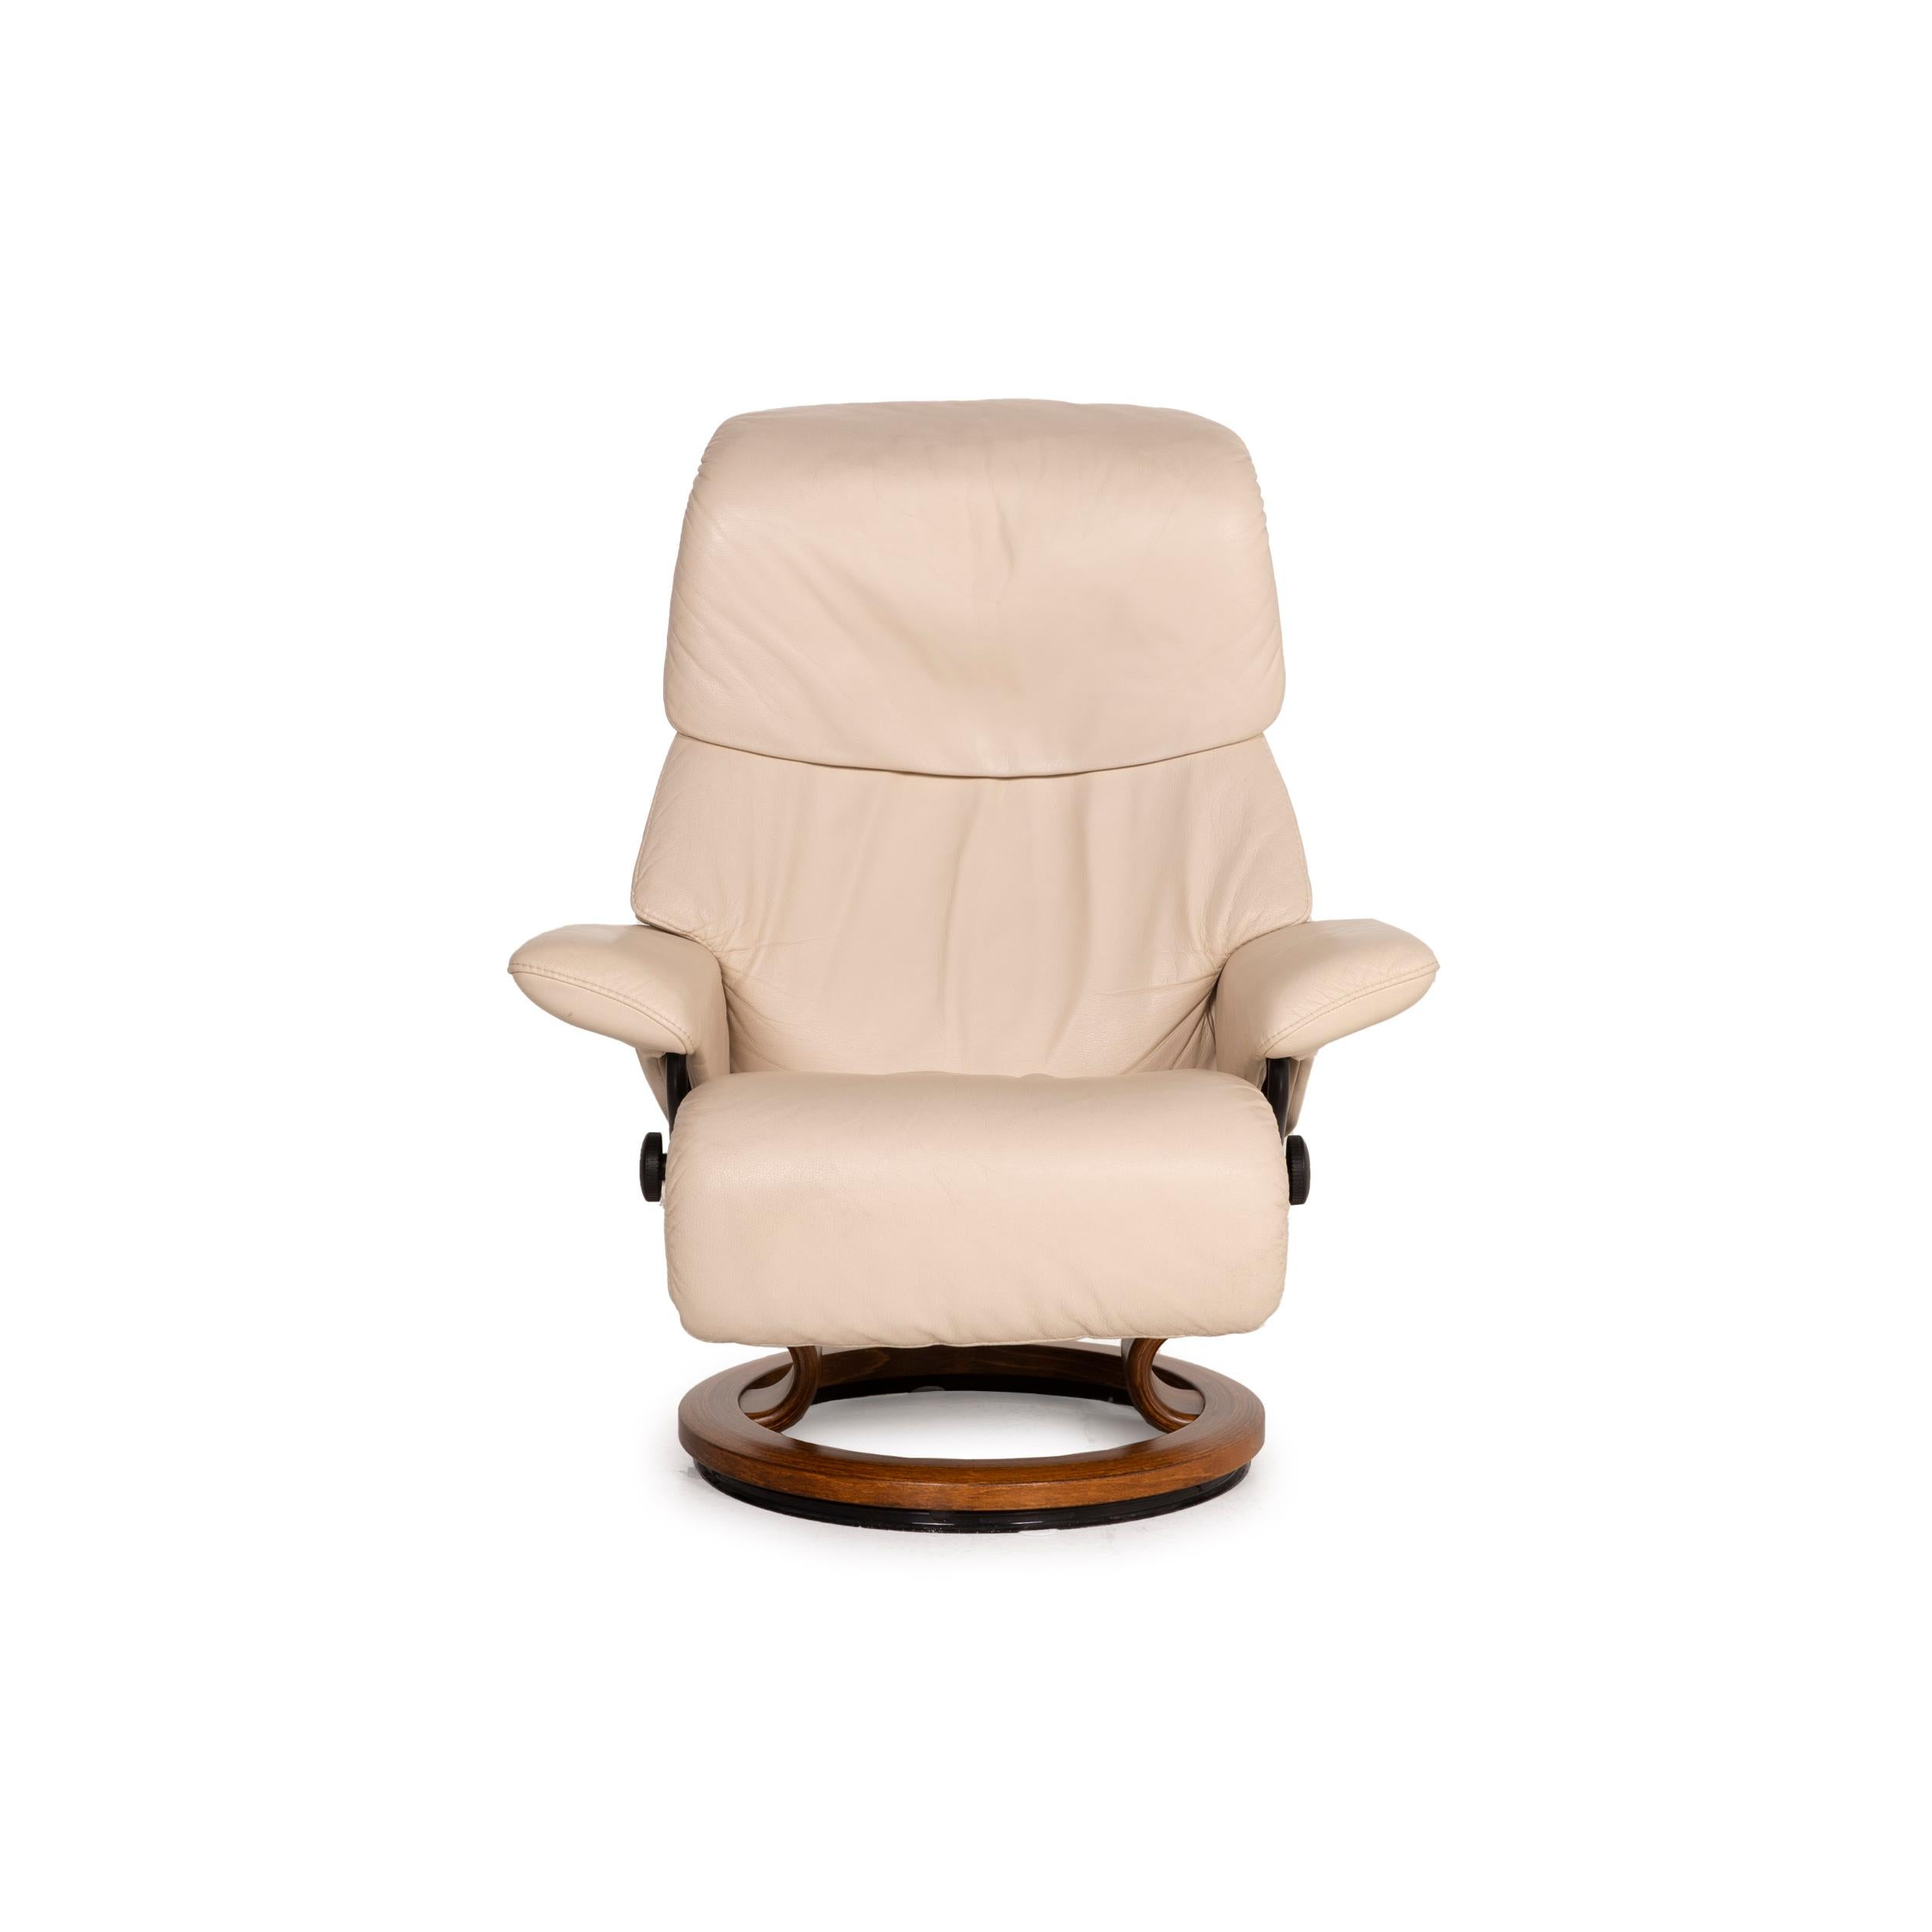 Stressless Vision Leather Armchair Cream Incl. Stool Relaxation Function 3